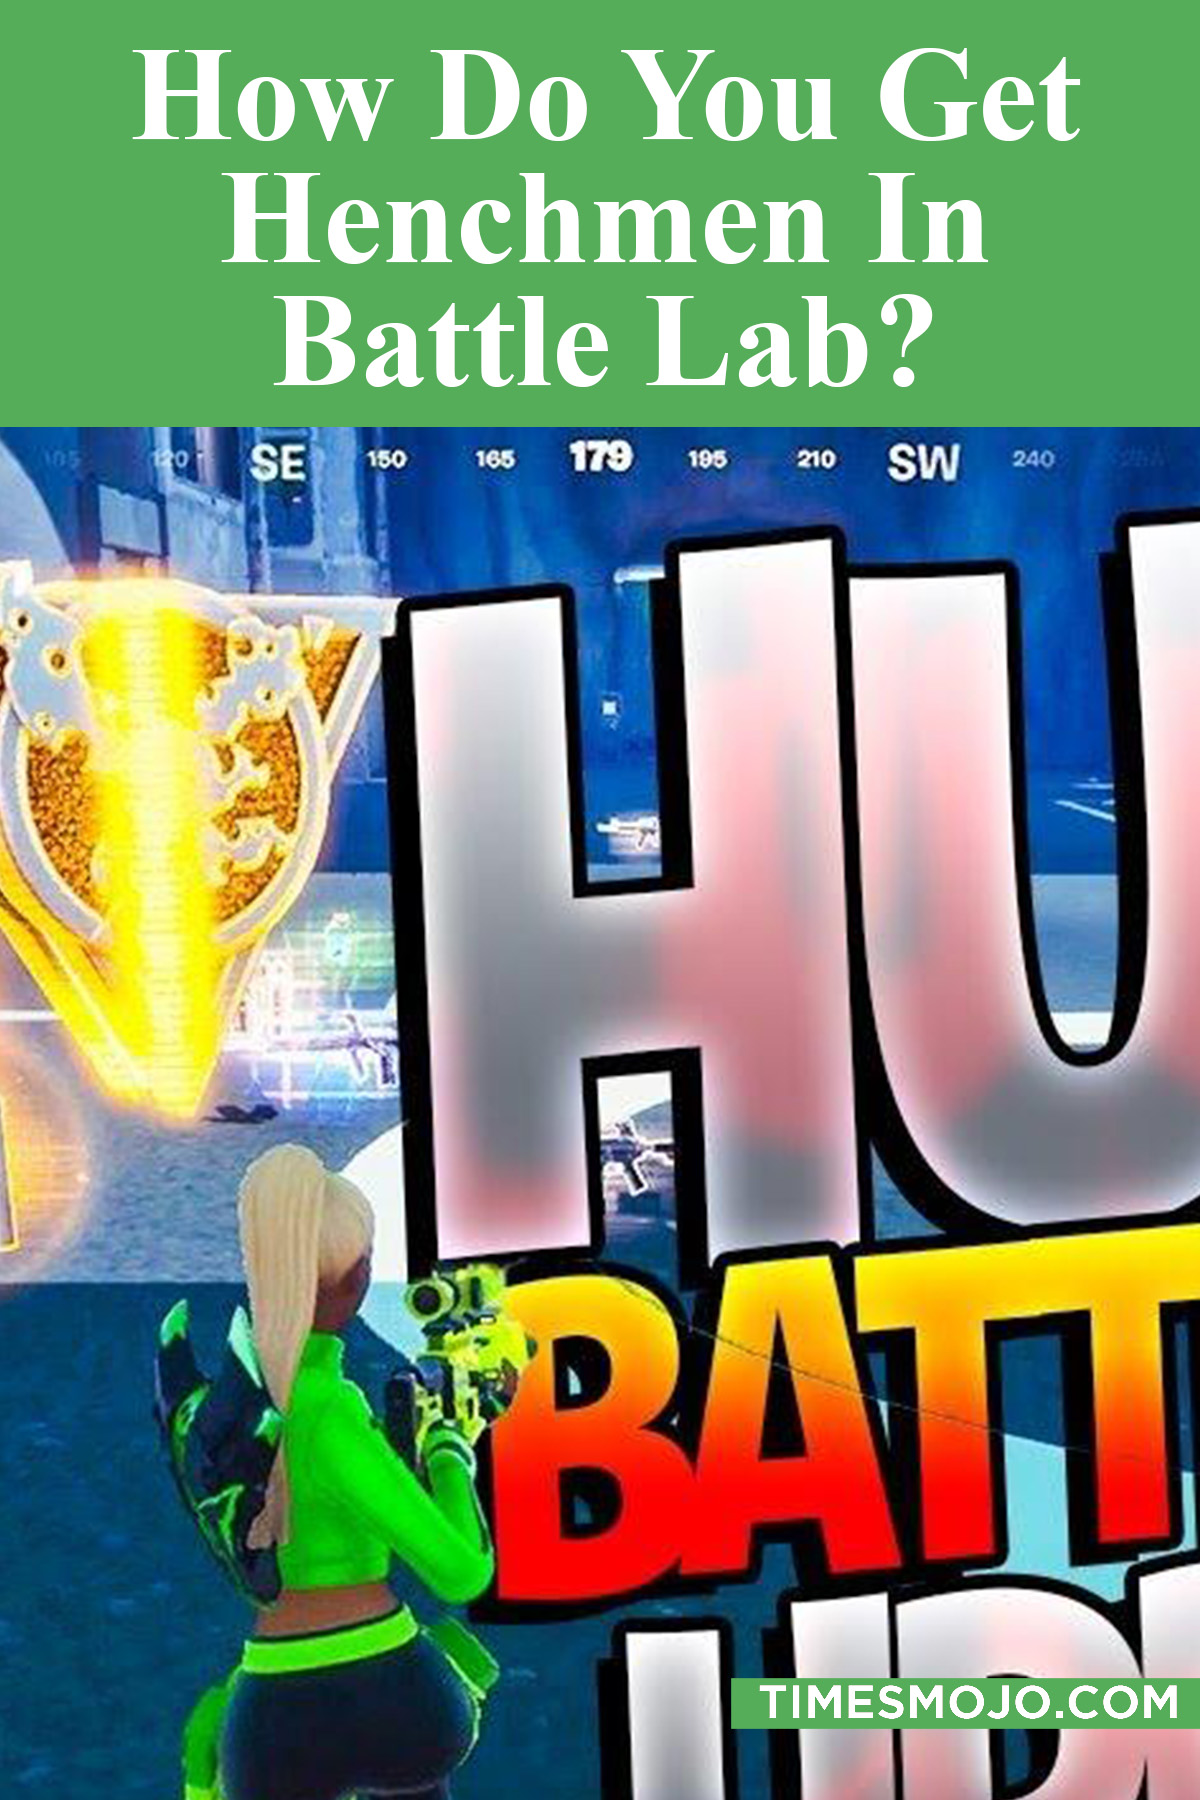 How Do You Get Henchmen In Battle Lab